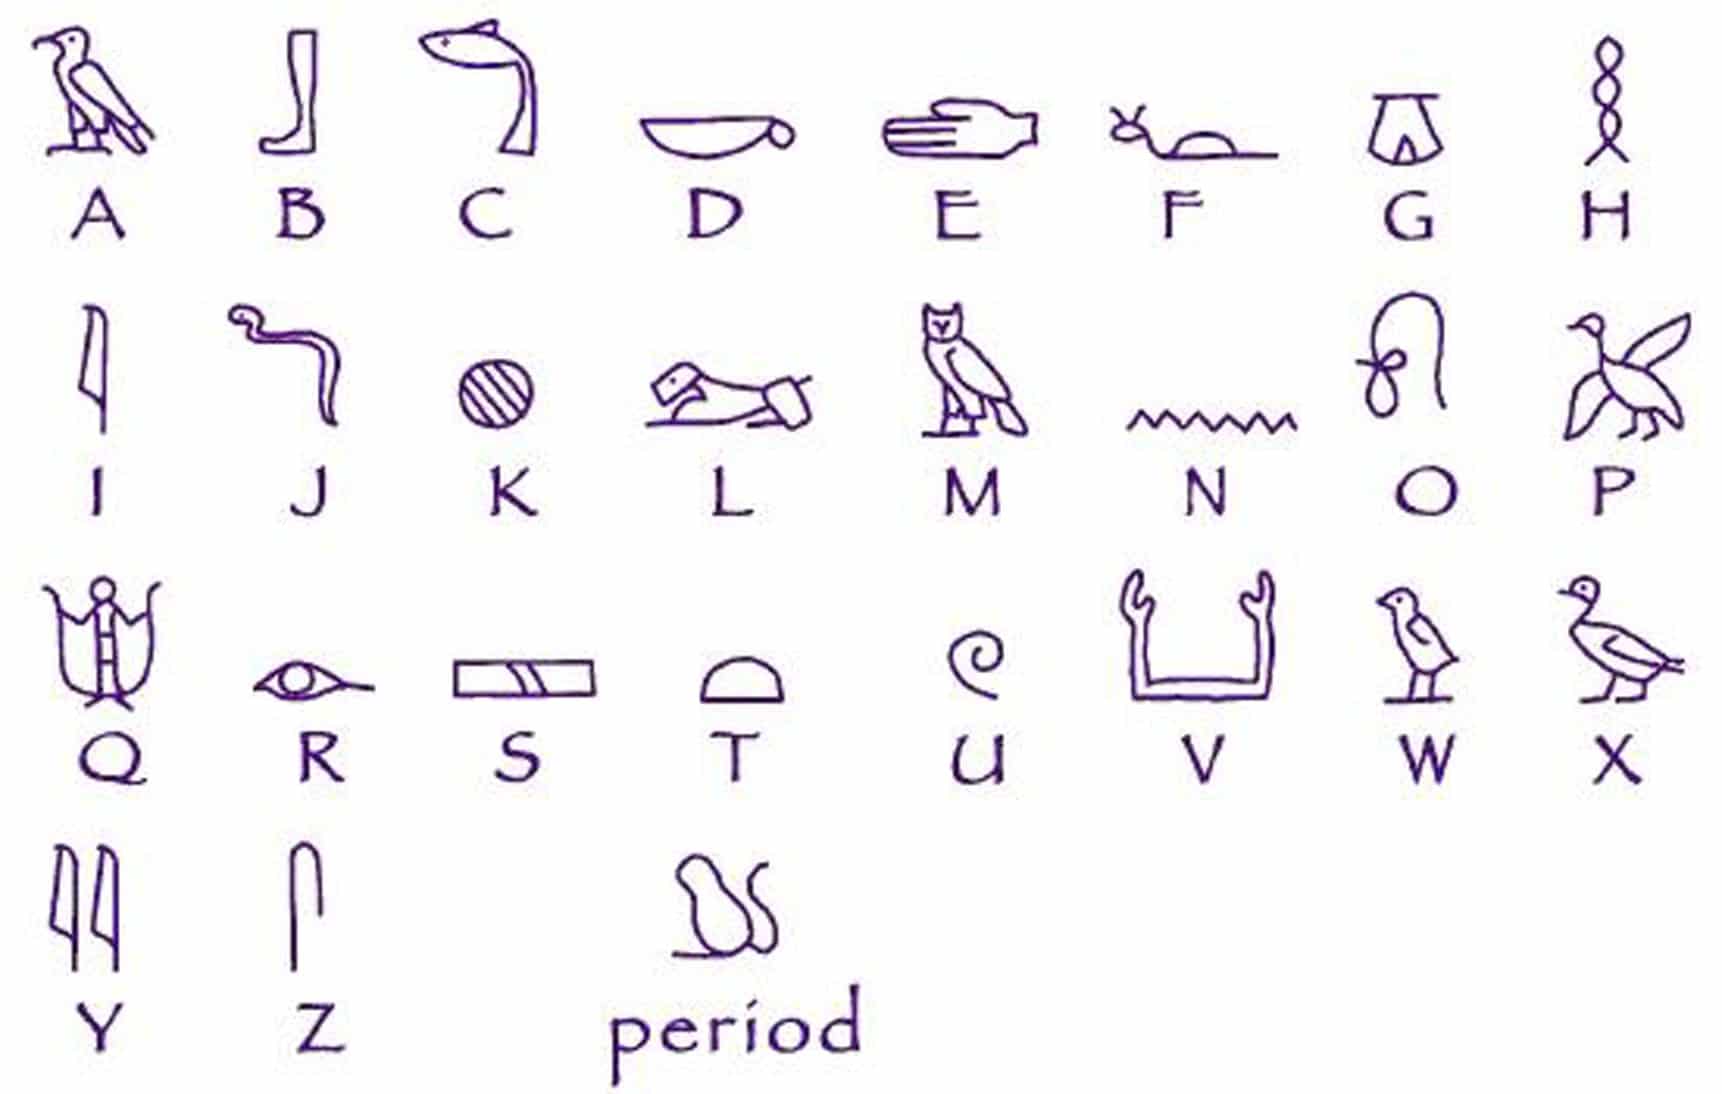 egypt-alphabet-a-z-quote-images-hd-free